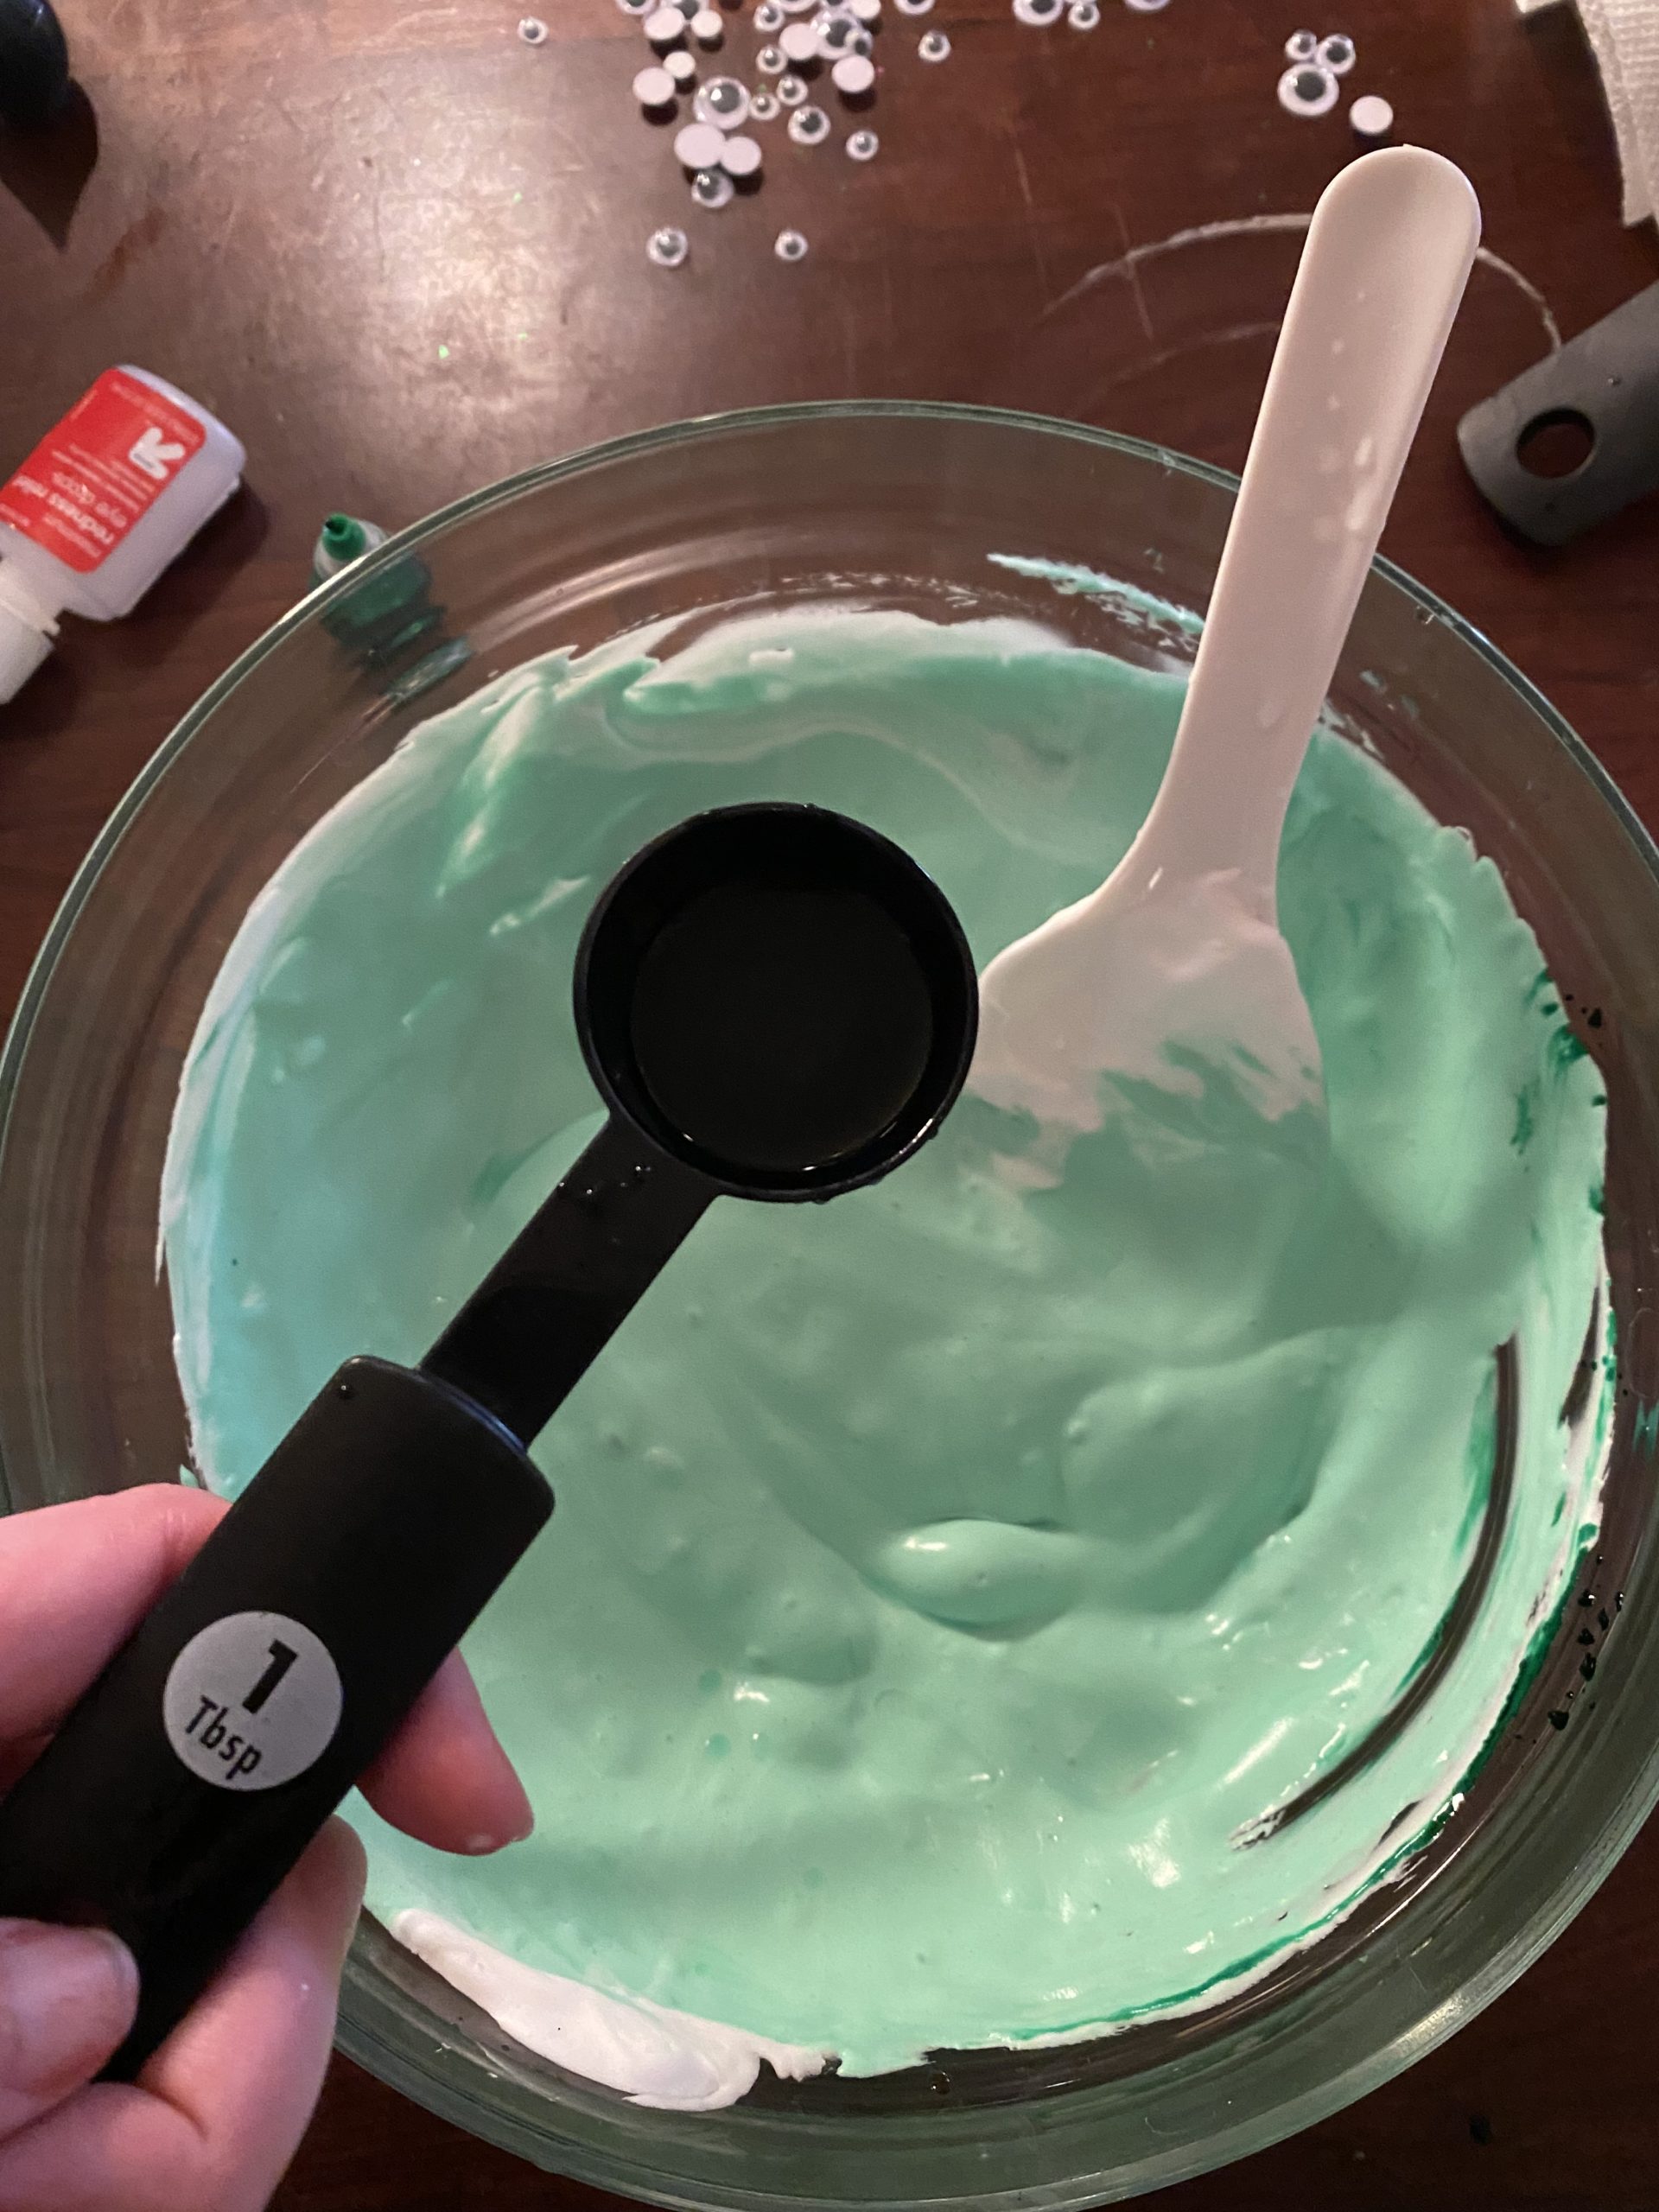 FrankenSlime – Charles County Public Library